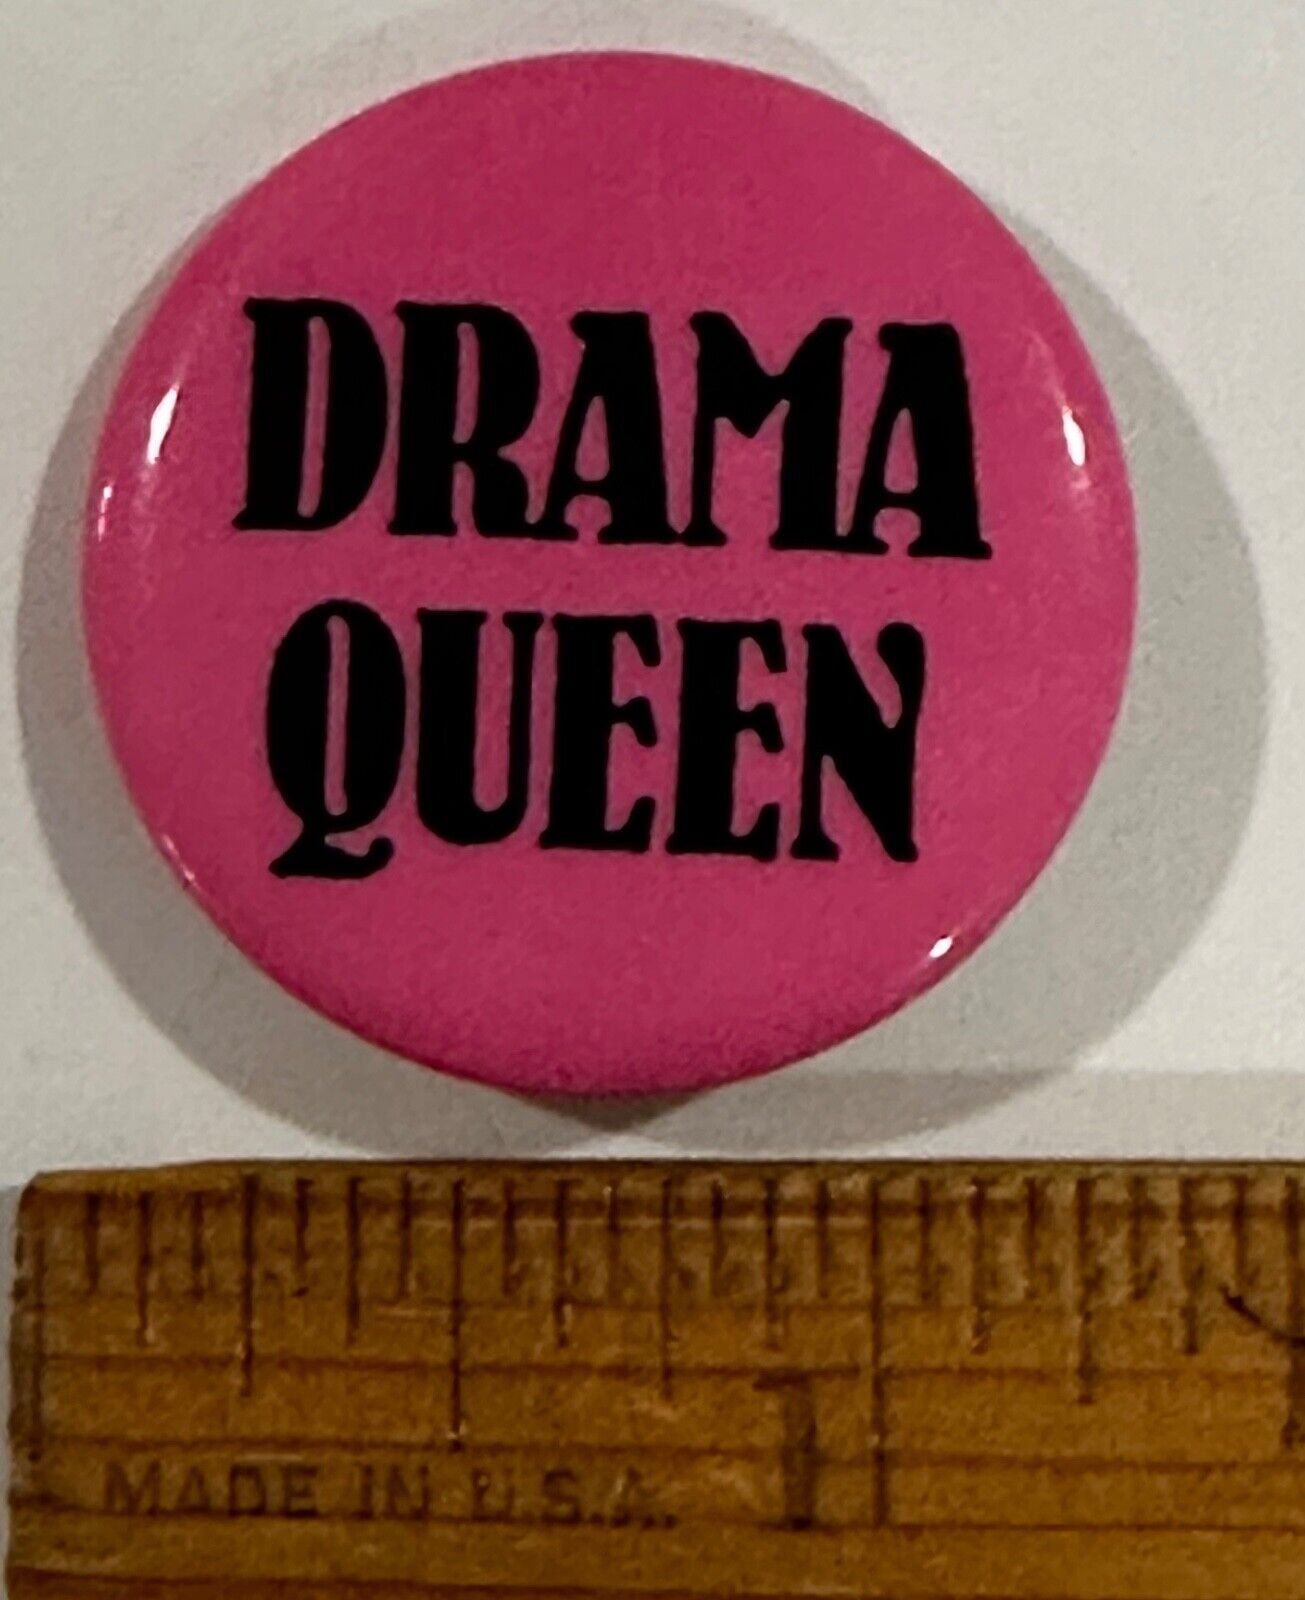 DRAMA QUEEN pinback button novelty gay lgbtq+ theatrical